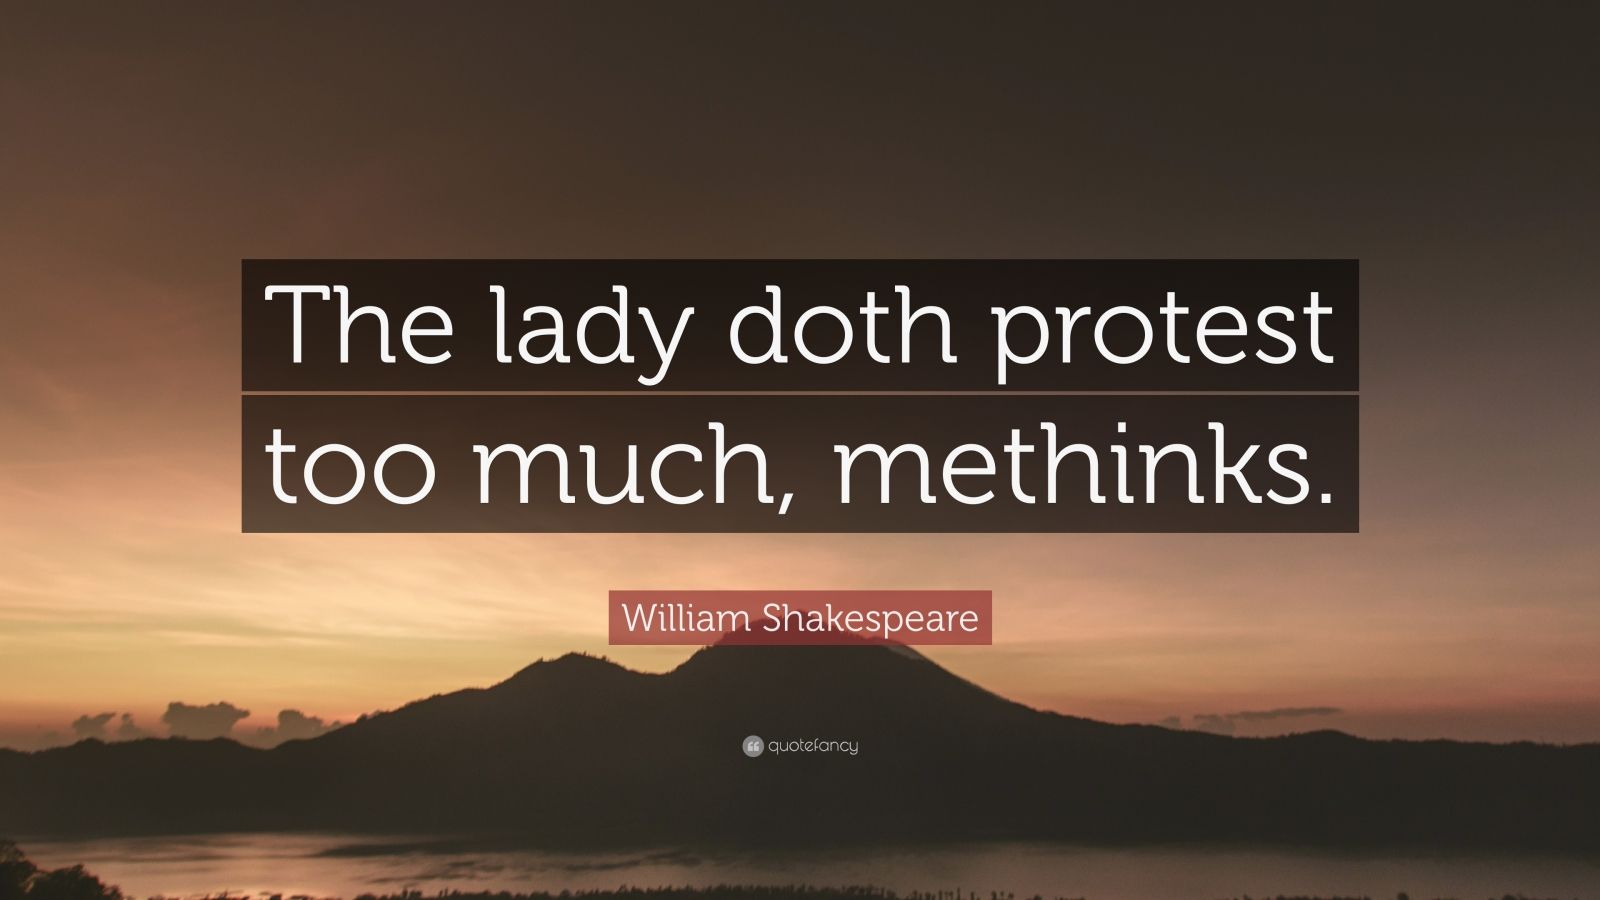 William Shakespeare Quote “the Lady Doth Protest Too Much Methinks” 12 Wallpapers Quotefancy 2953